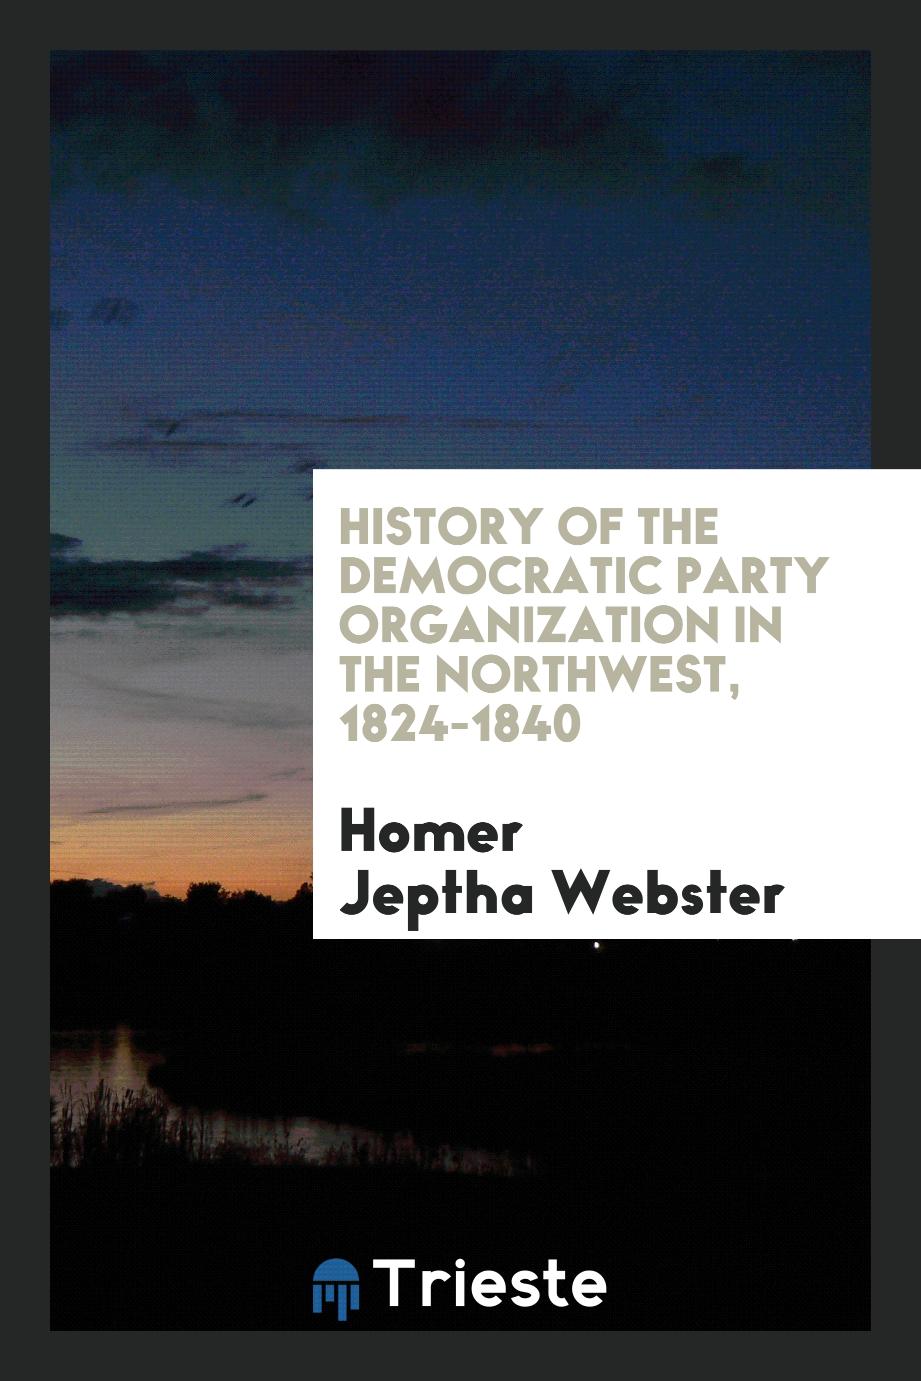 History of the Democratic Party Organization in the Northwest, 1824-1840